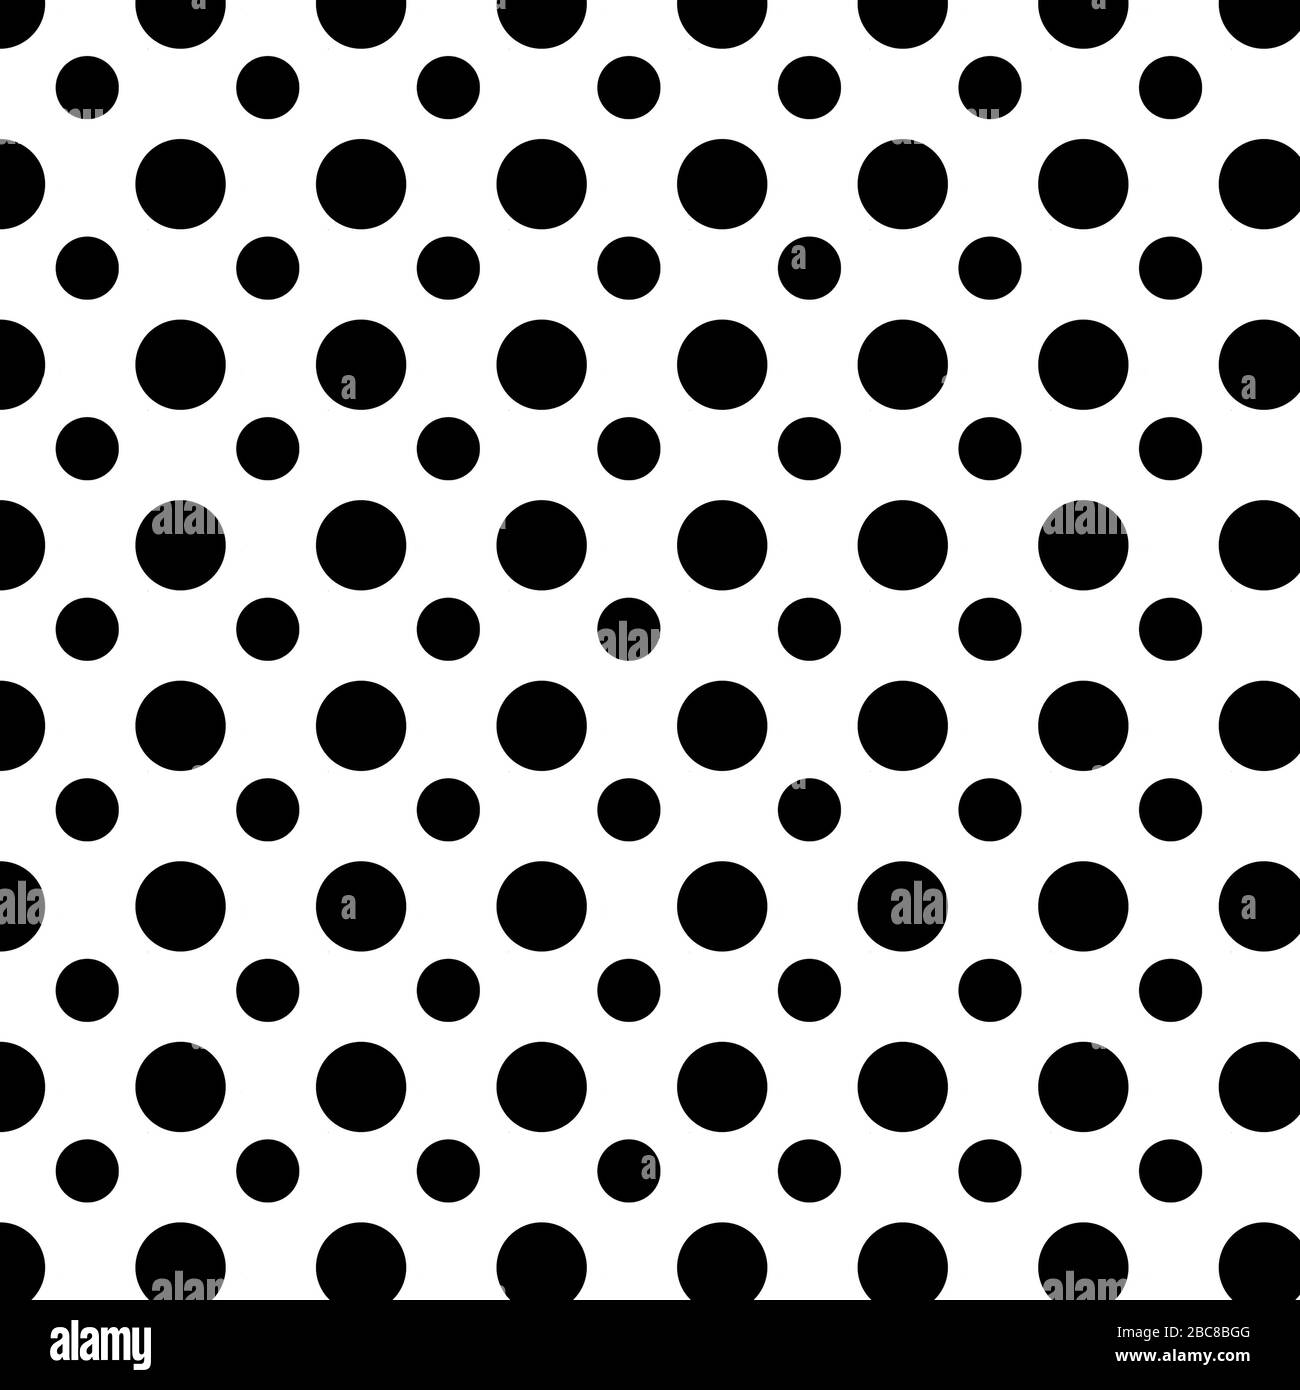 Black and white mixed size polka dots pattern background. Black circles are  different sizes on white background in 12x12 backdrops Stock Photo - Alamy